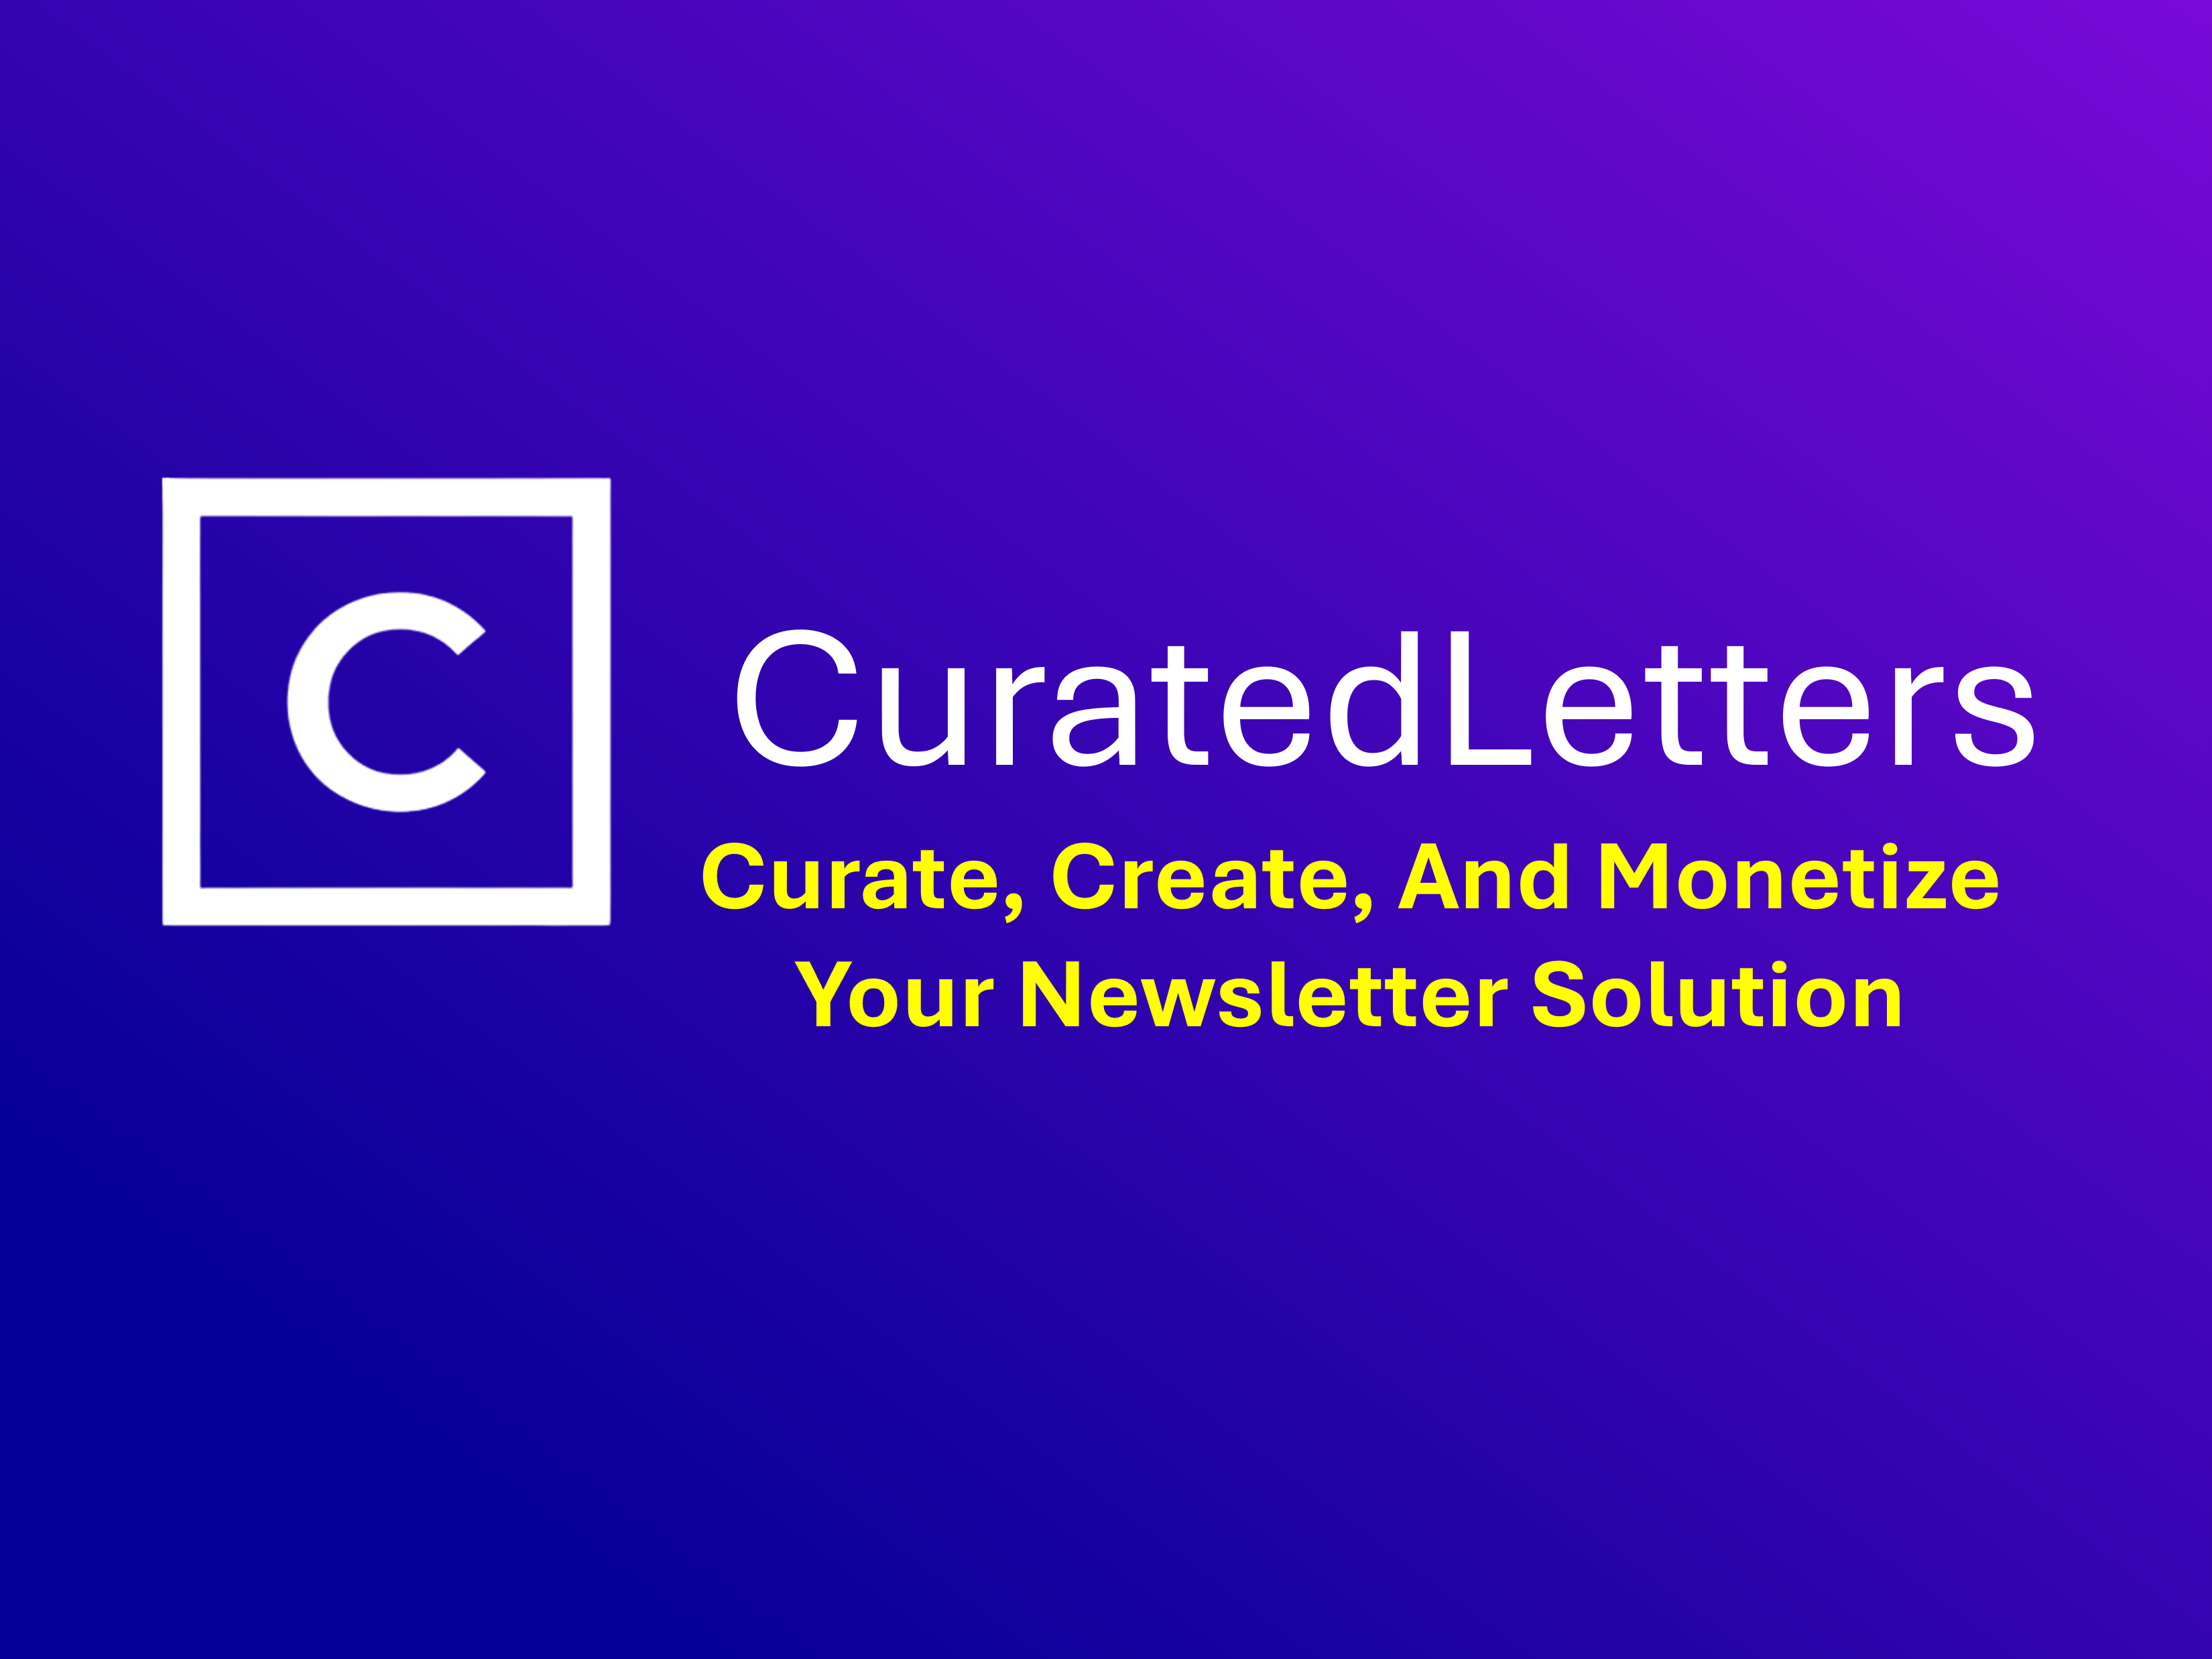 Newsletters 2.0: CuratedLetters Redefines Email Marketing